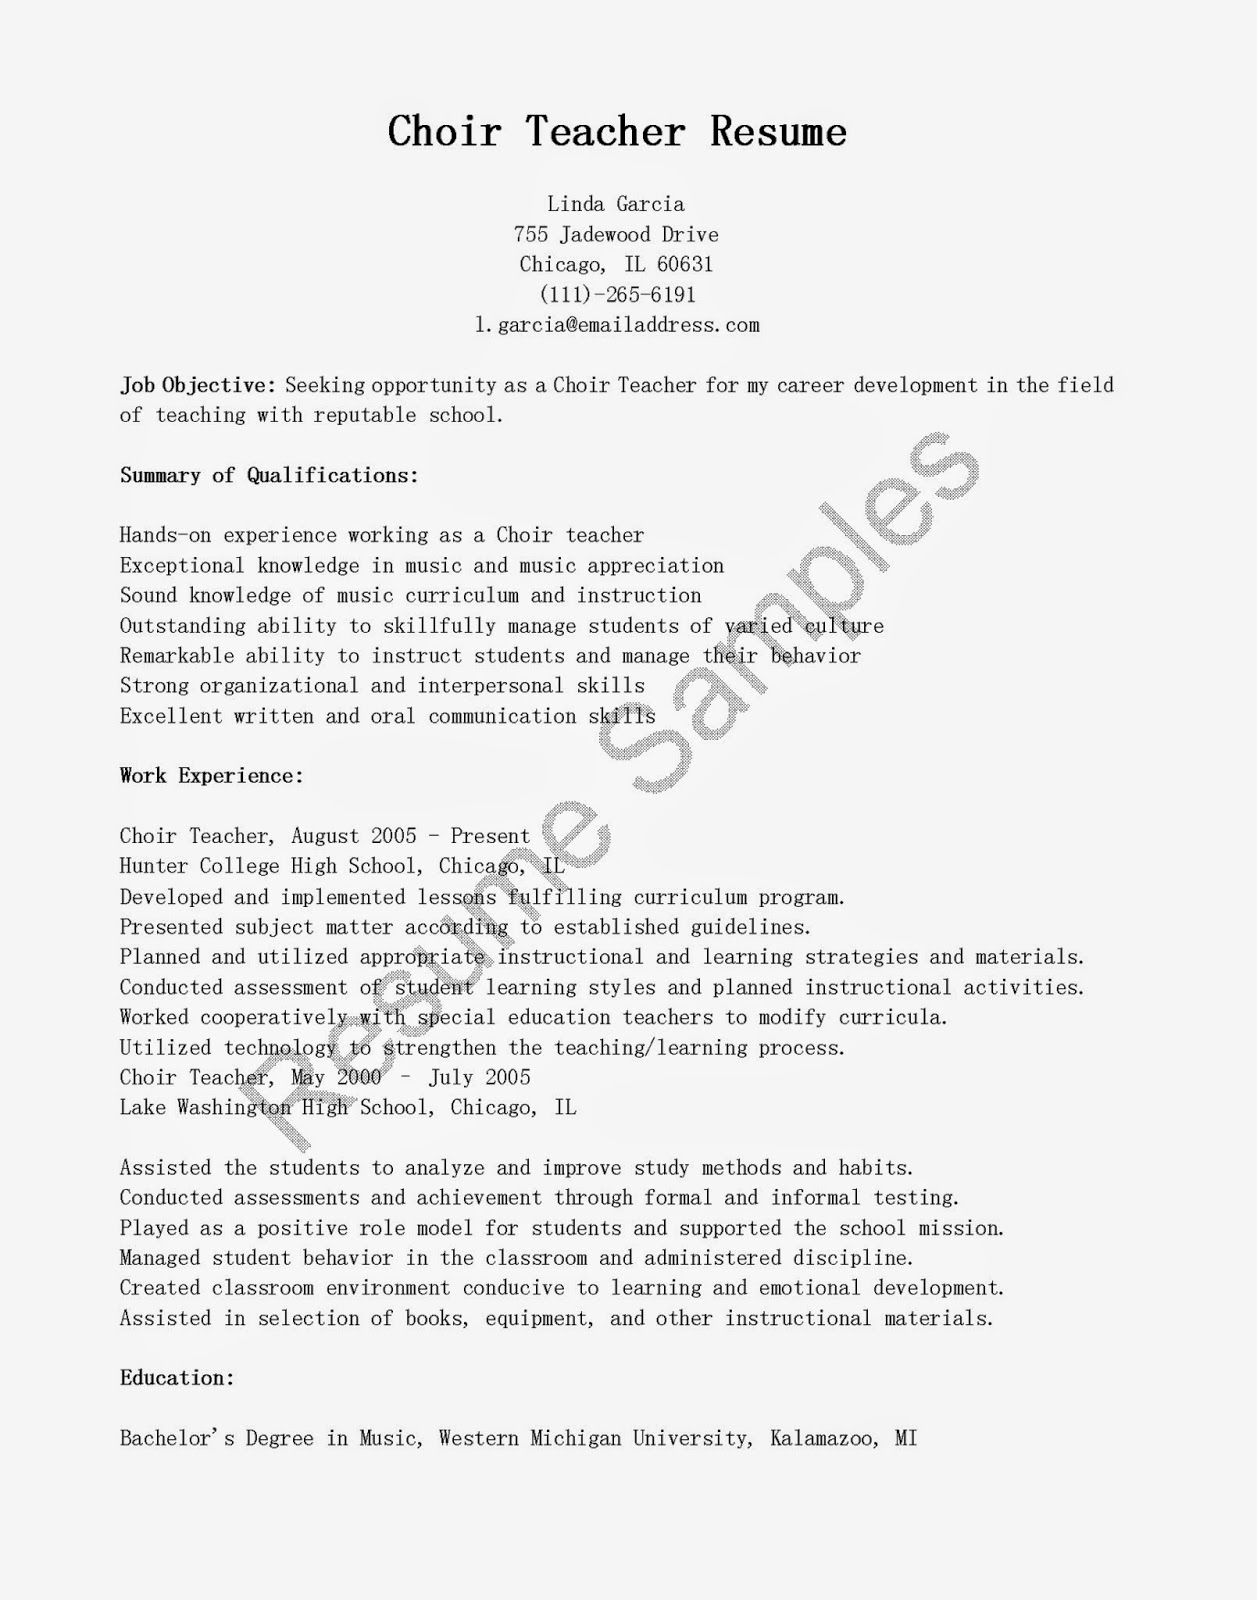 Mission Letter Template - Teacher Cover Letter Template Best Higher Education Cover Letters